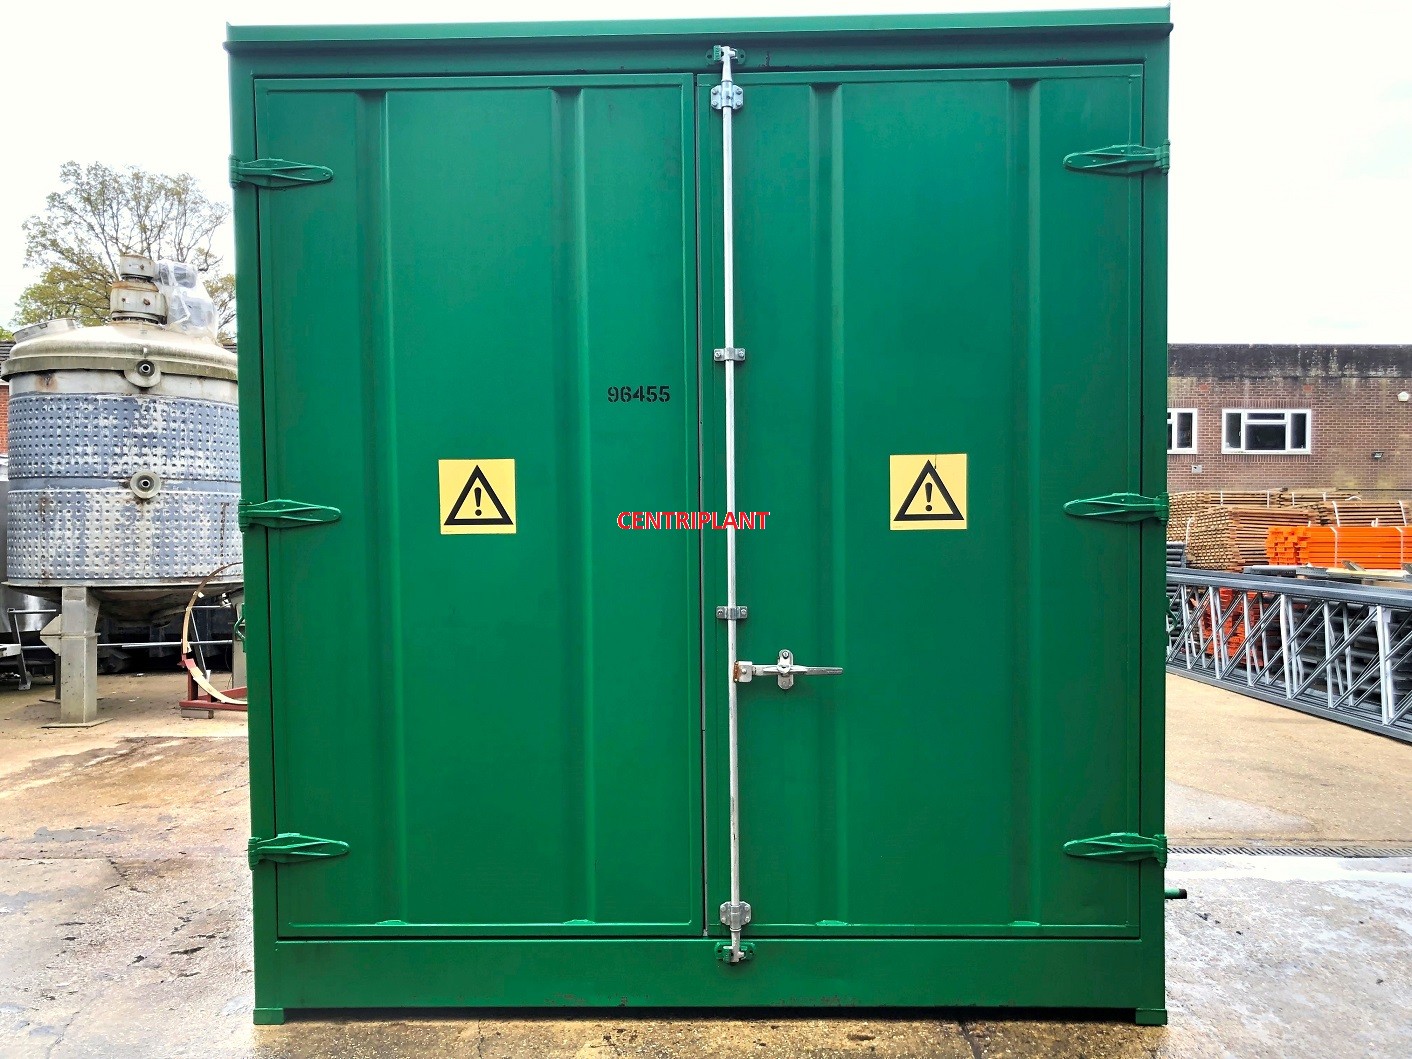 96455 - EMPTEEZY FIRERATED BUNDED CHEMSTORE MODEL: DPU16-4FR 16 DRUMS OR 4 IBCS